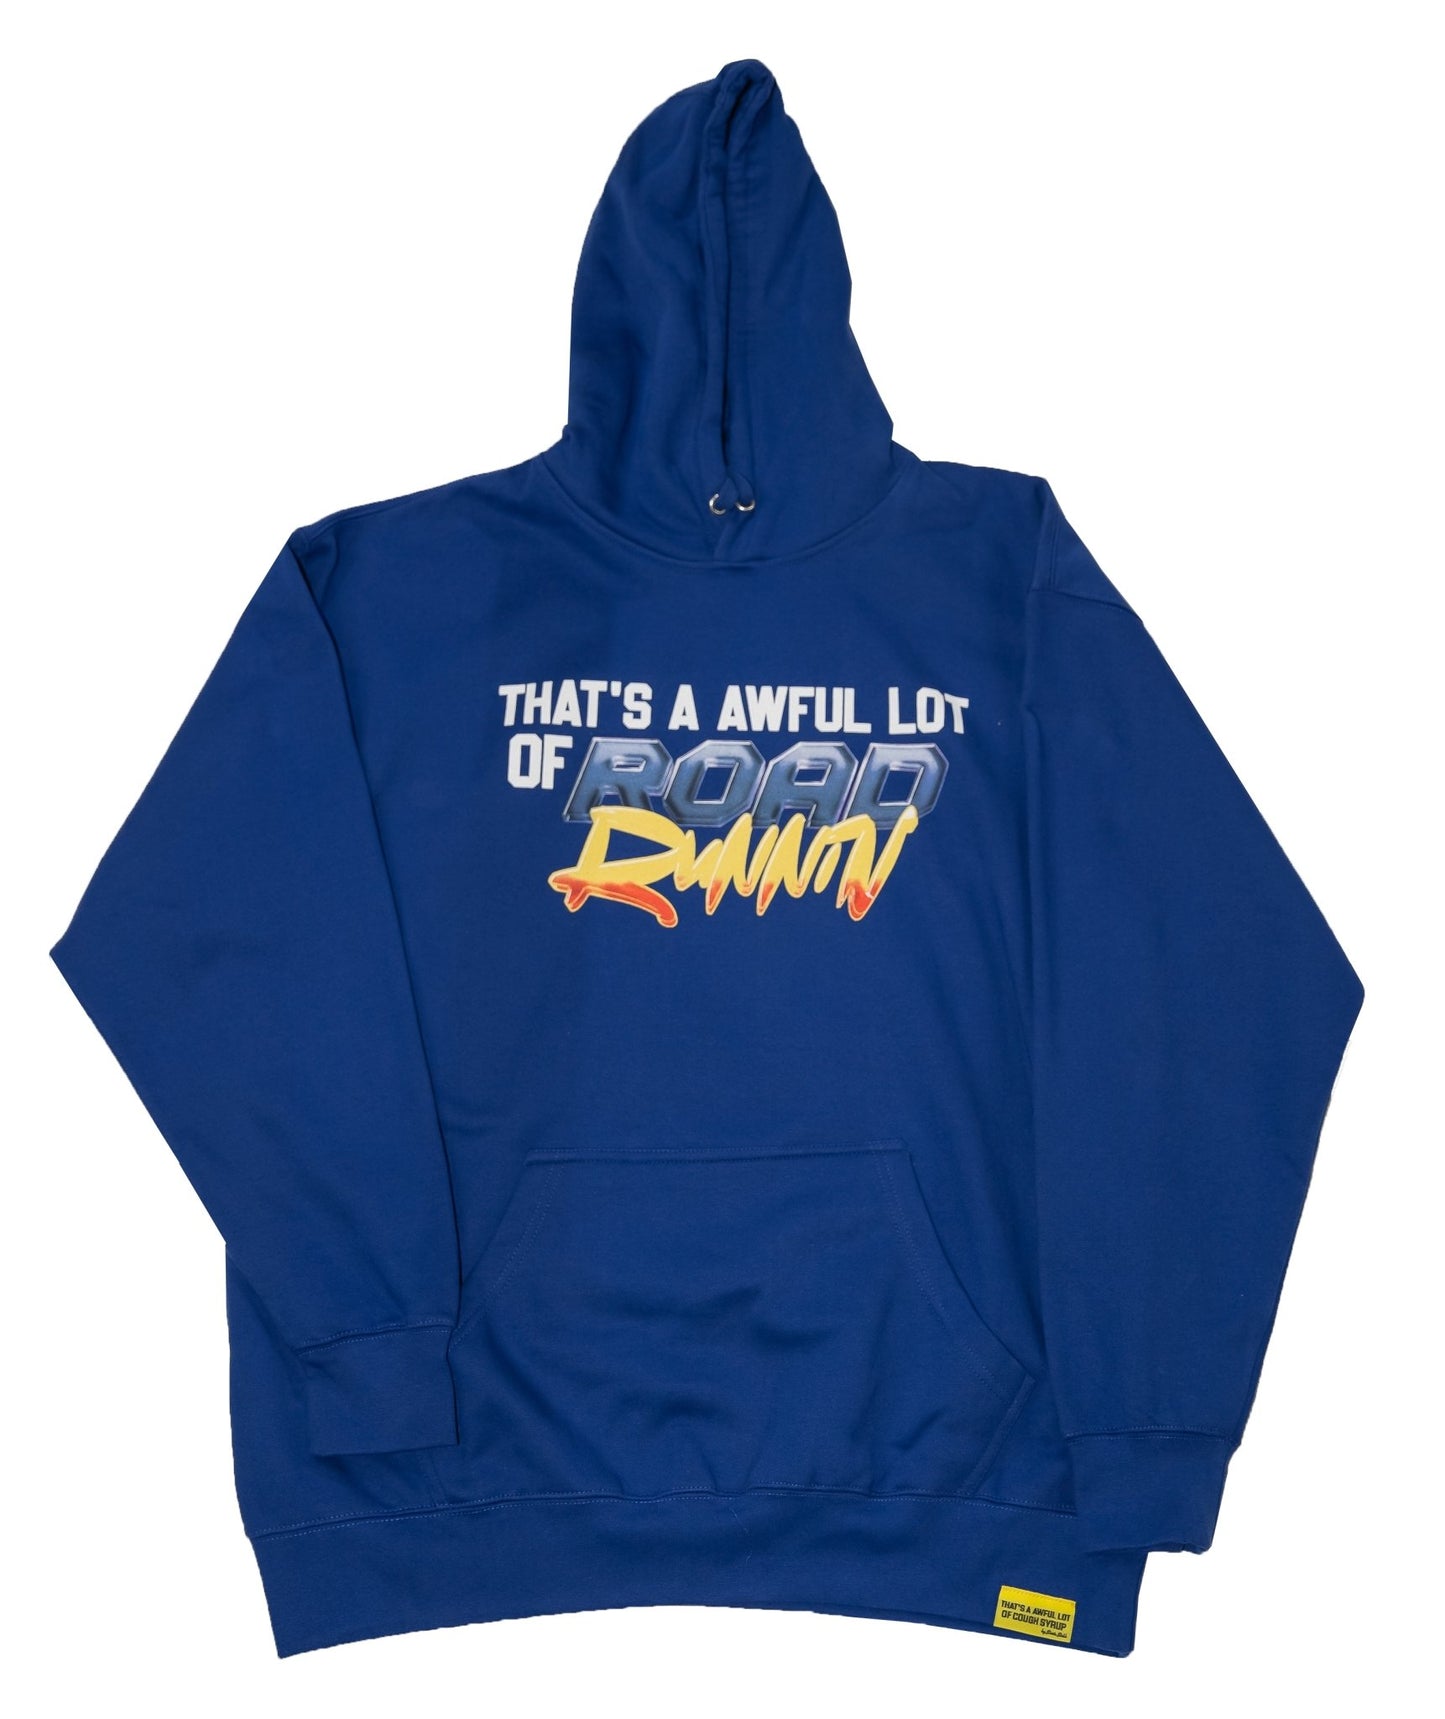 That’s A Awful Lot Of Road Runnin Hoodie BLUE - Road Runners World Global